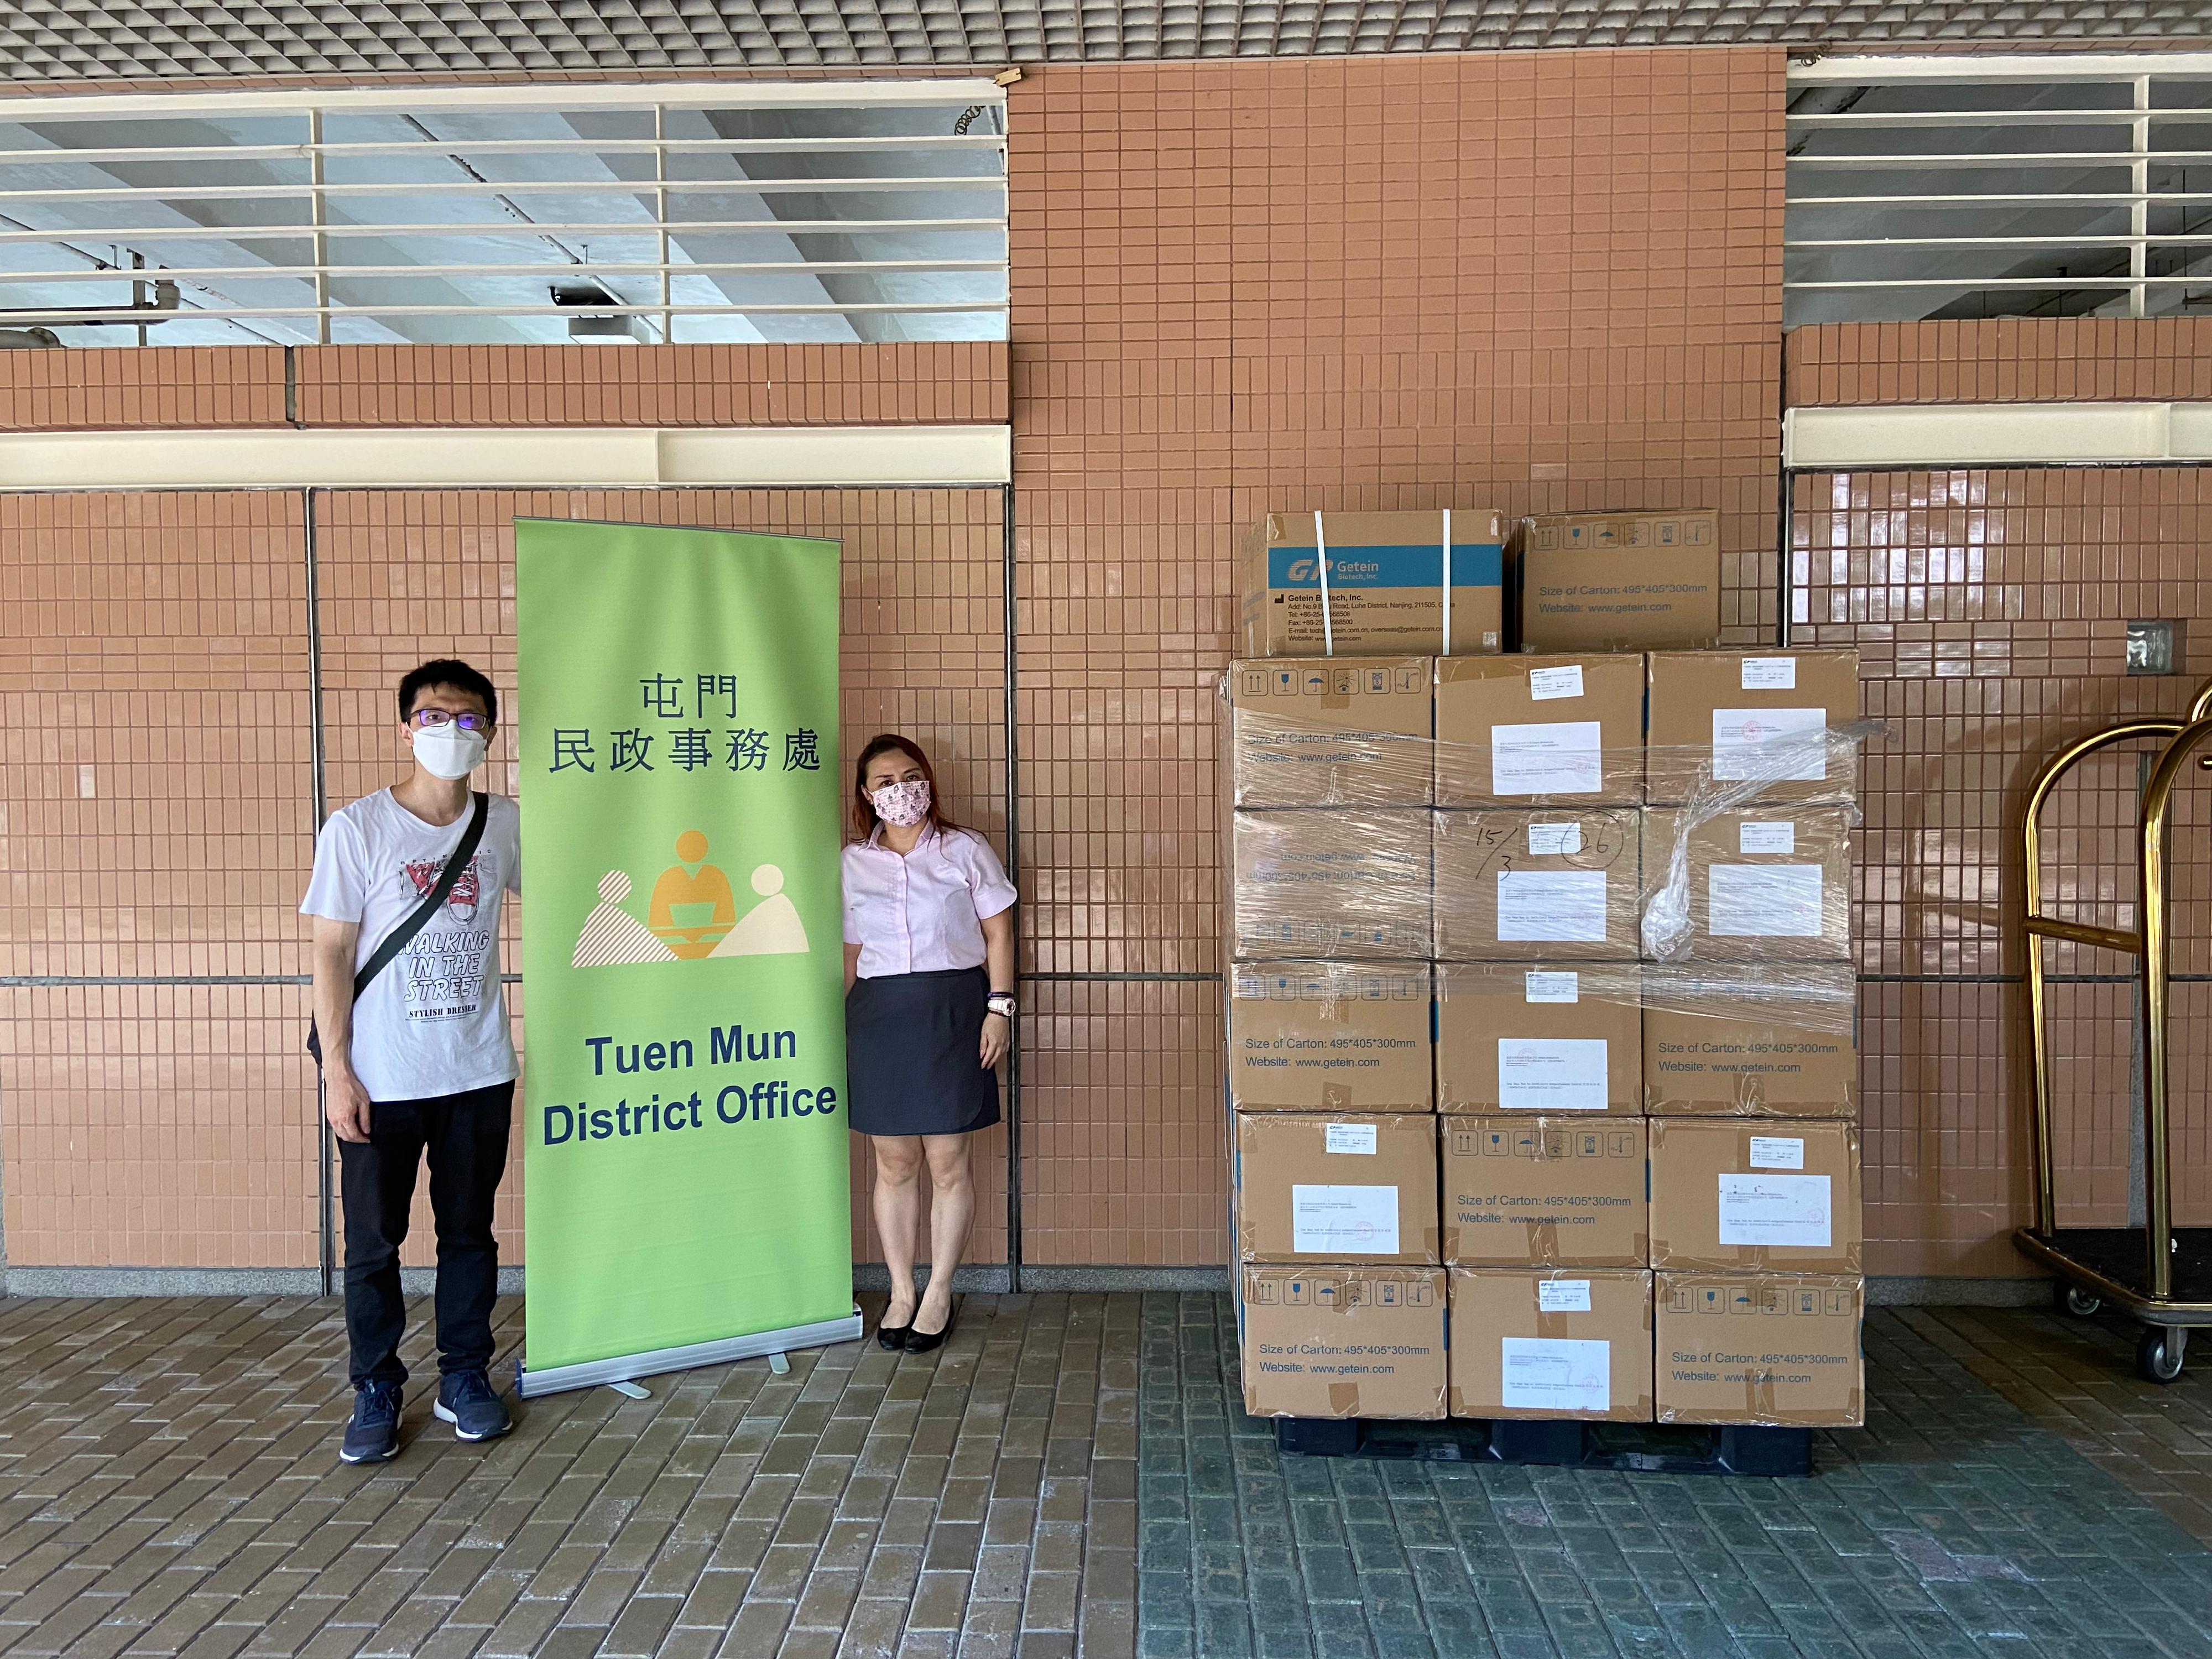 The Tuen Mun District Office today (August 1) distributed COVID-19 rapid test kits to households, cleansing workers and property management staff living and working in Kingston Terrace for voluntary testing through the property management company.

